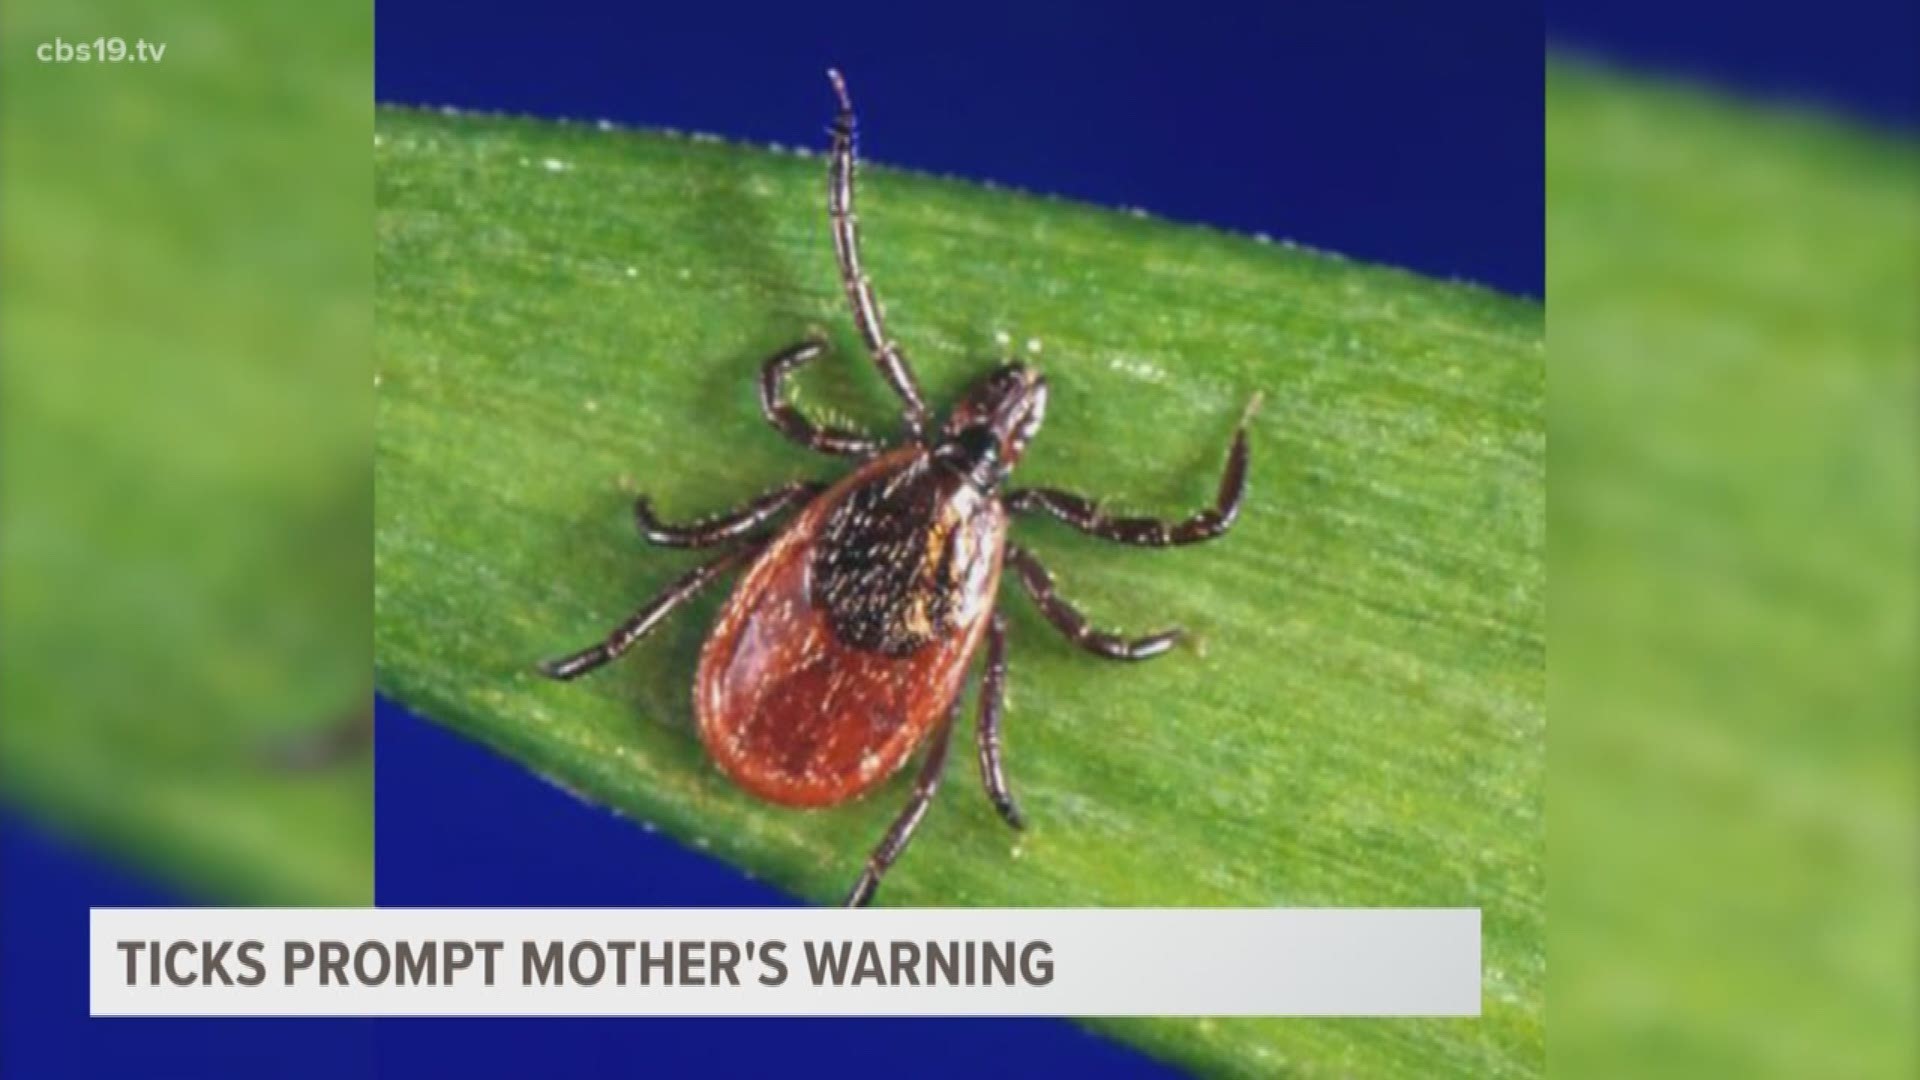 After her four-year old son was bitten by ticks and diagnosed with Lyme disease, an East Texas mother is issuing a warning to other parents.